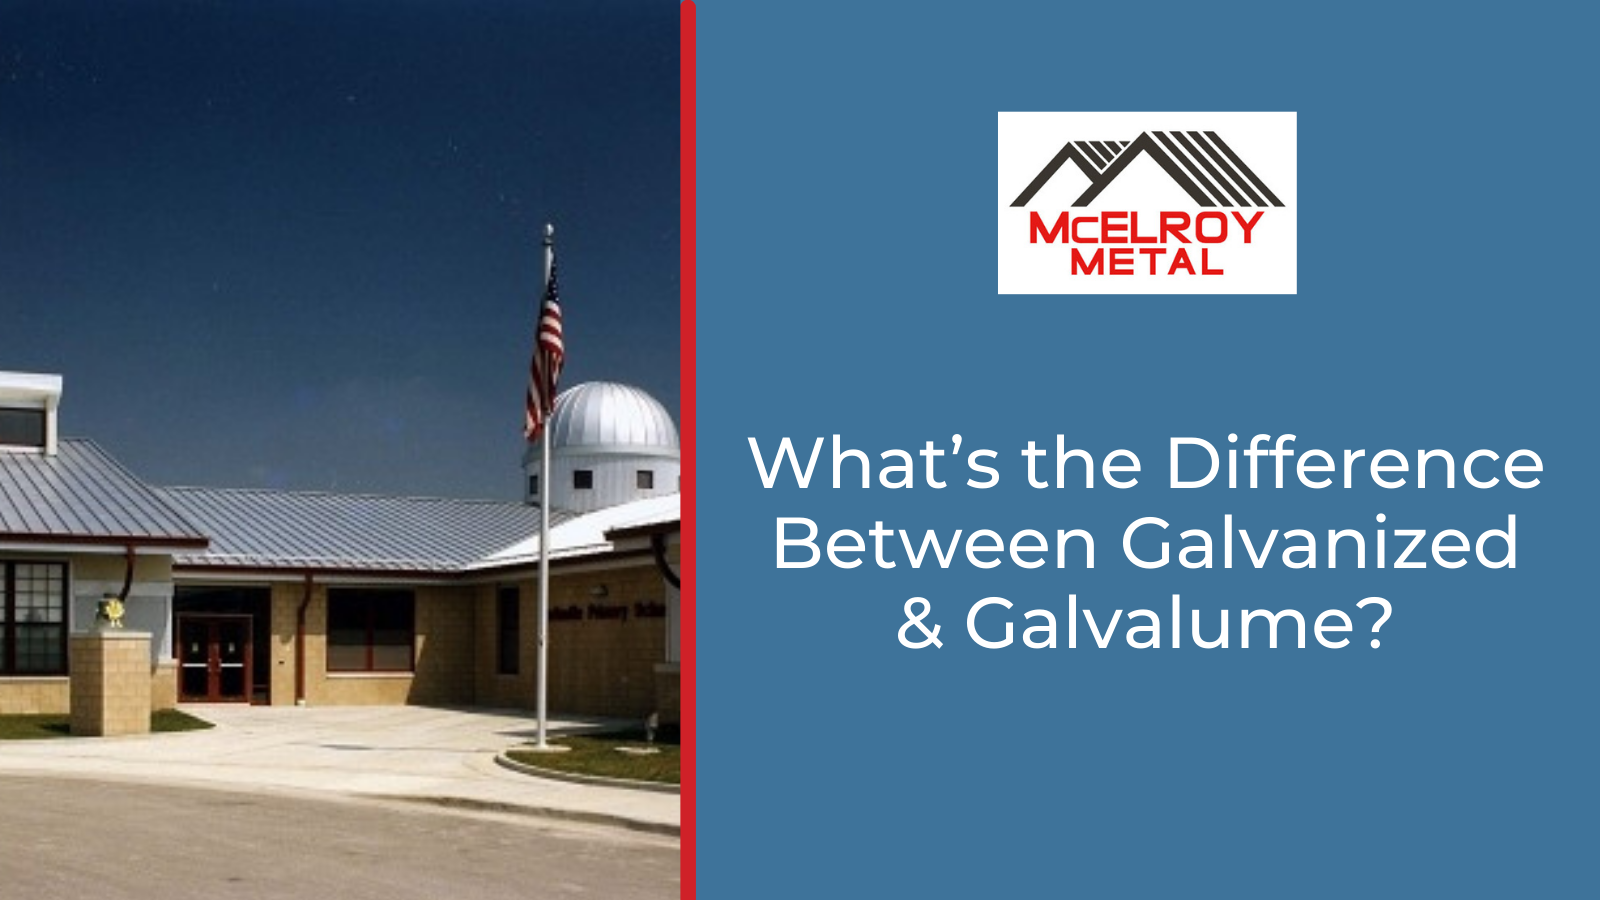 What’s the Difference Between Galvanized and Galvalume?